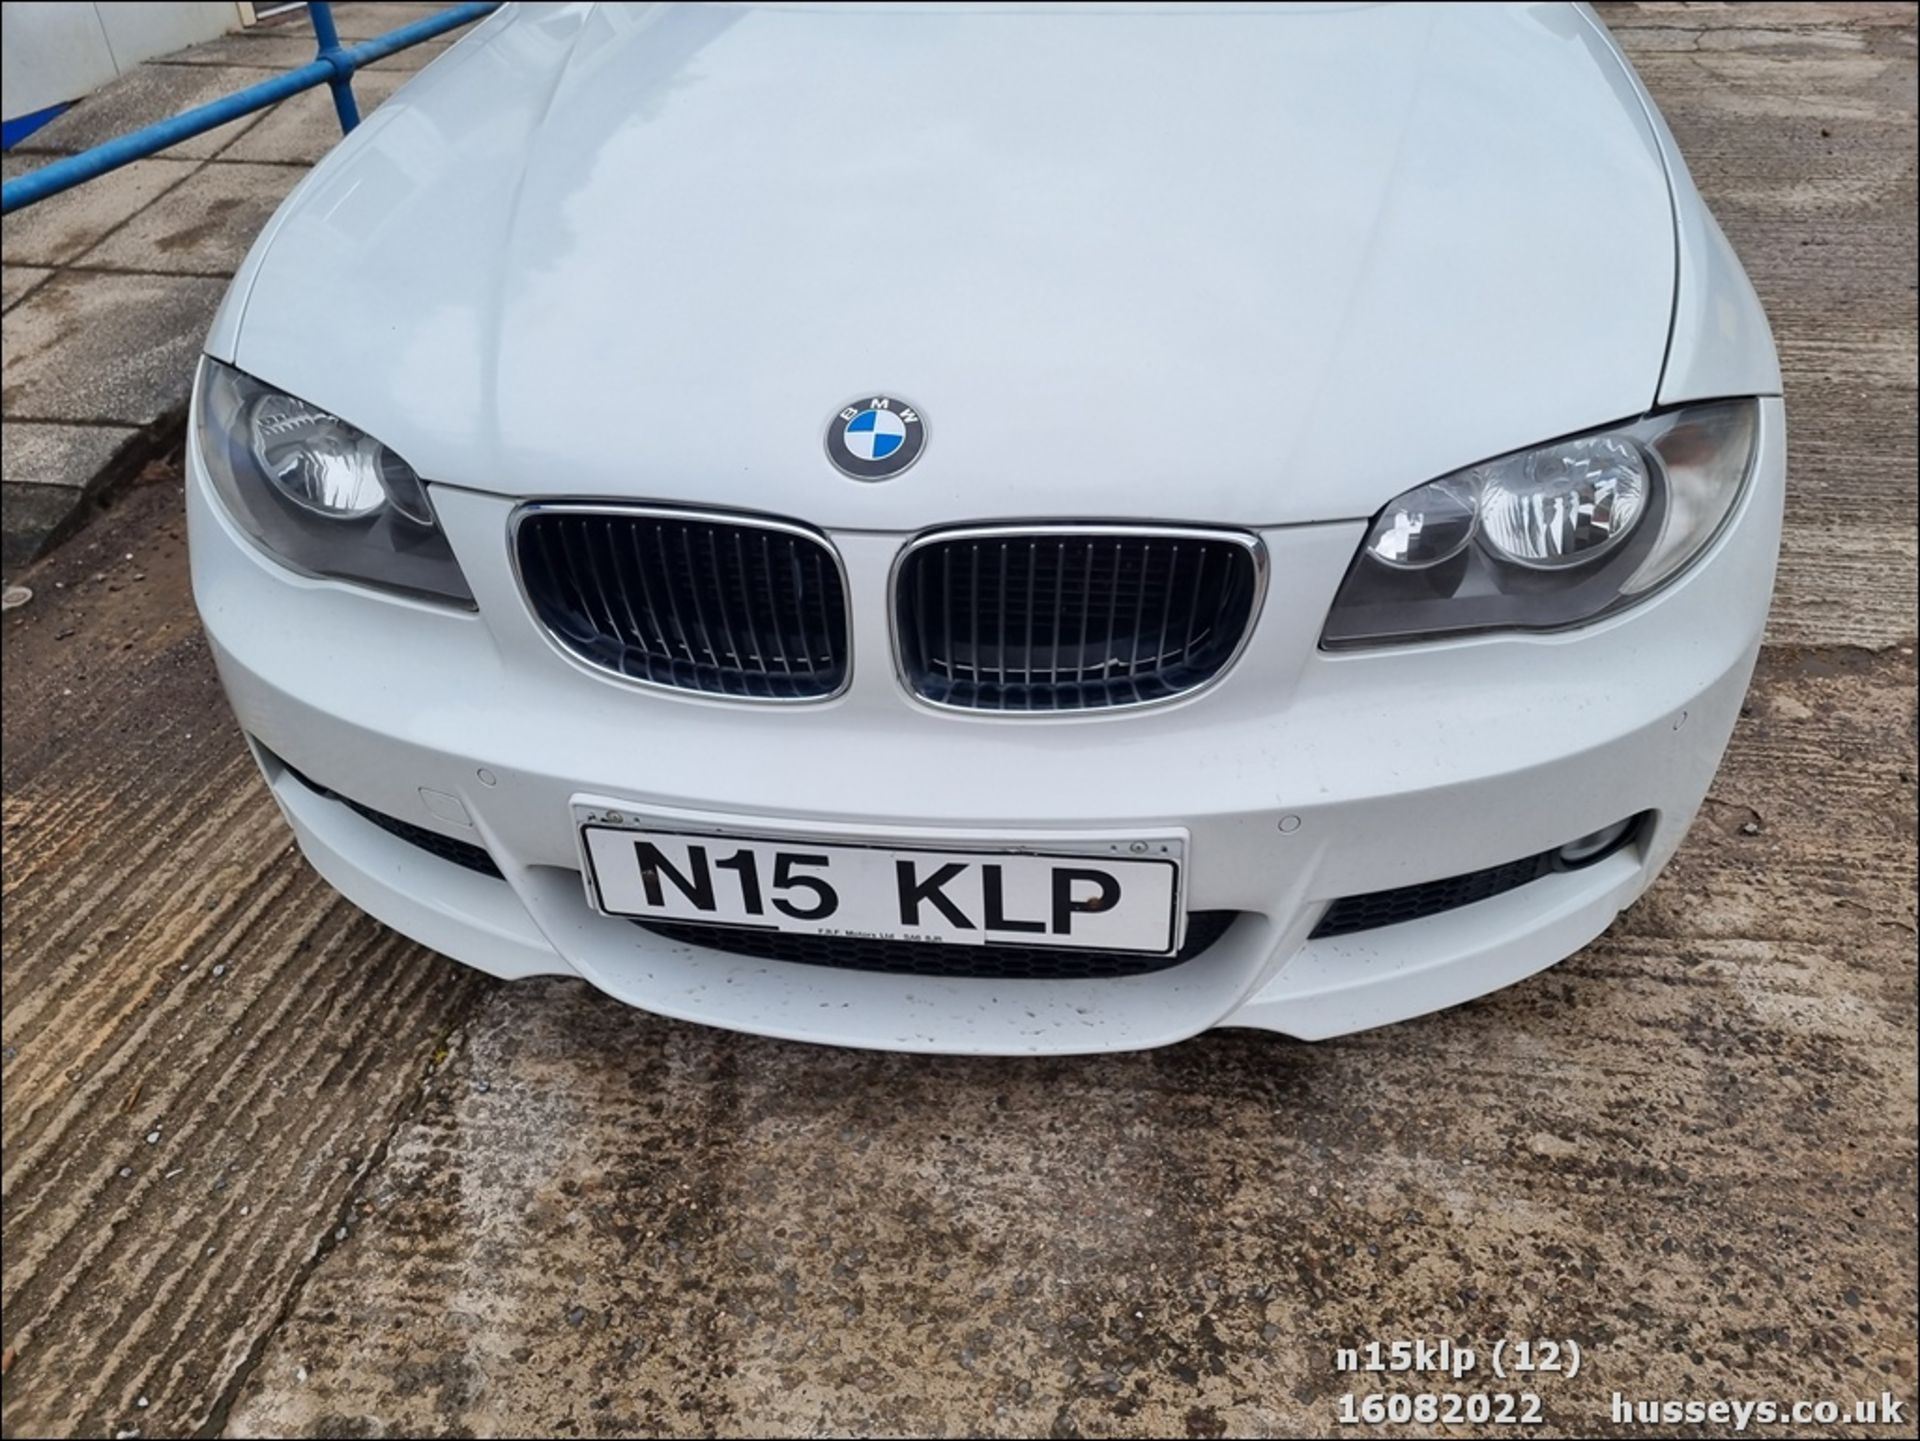 2008 BMW 118I M SPORT - 1995cc 2dr Convertible (White, 97k) - Image 12 of 19